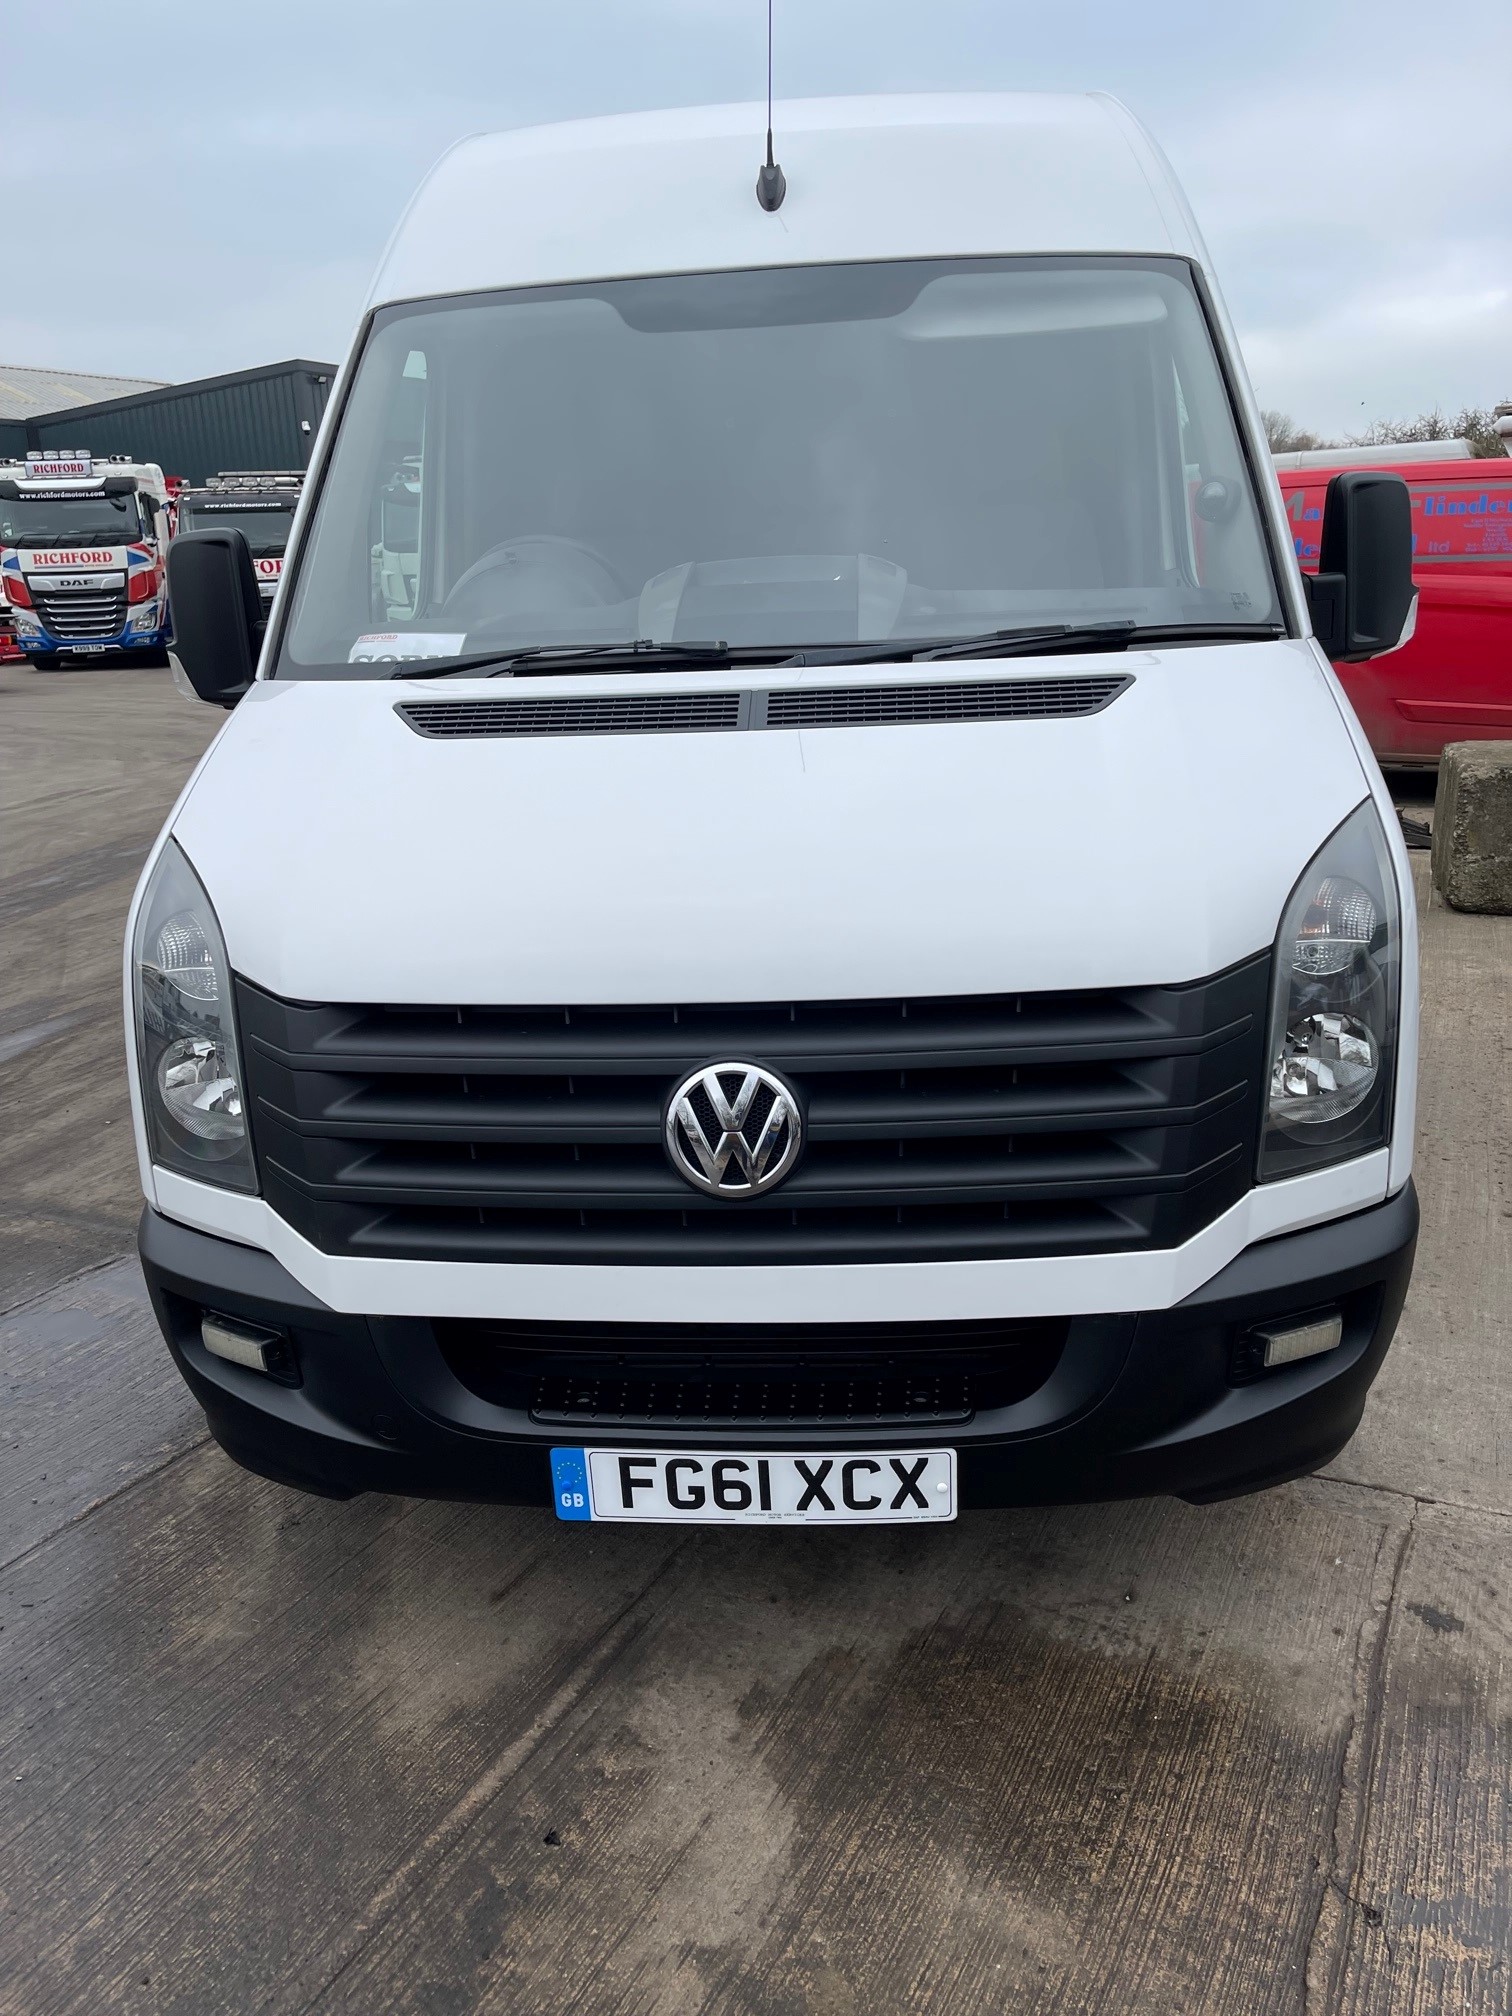 Used stock Service Vans - Available Now